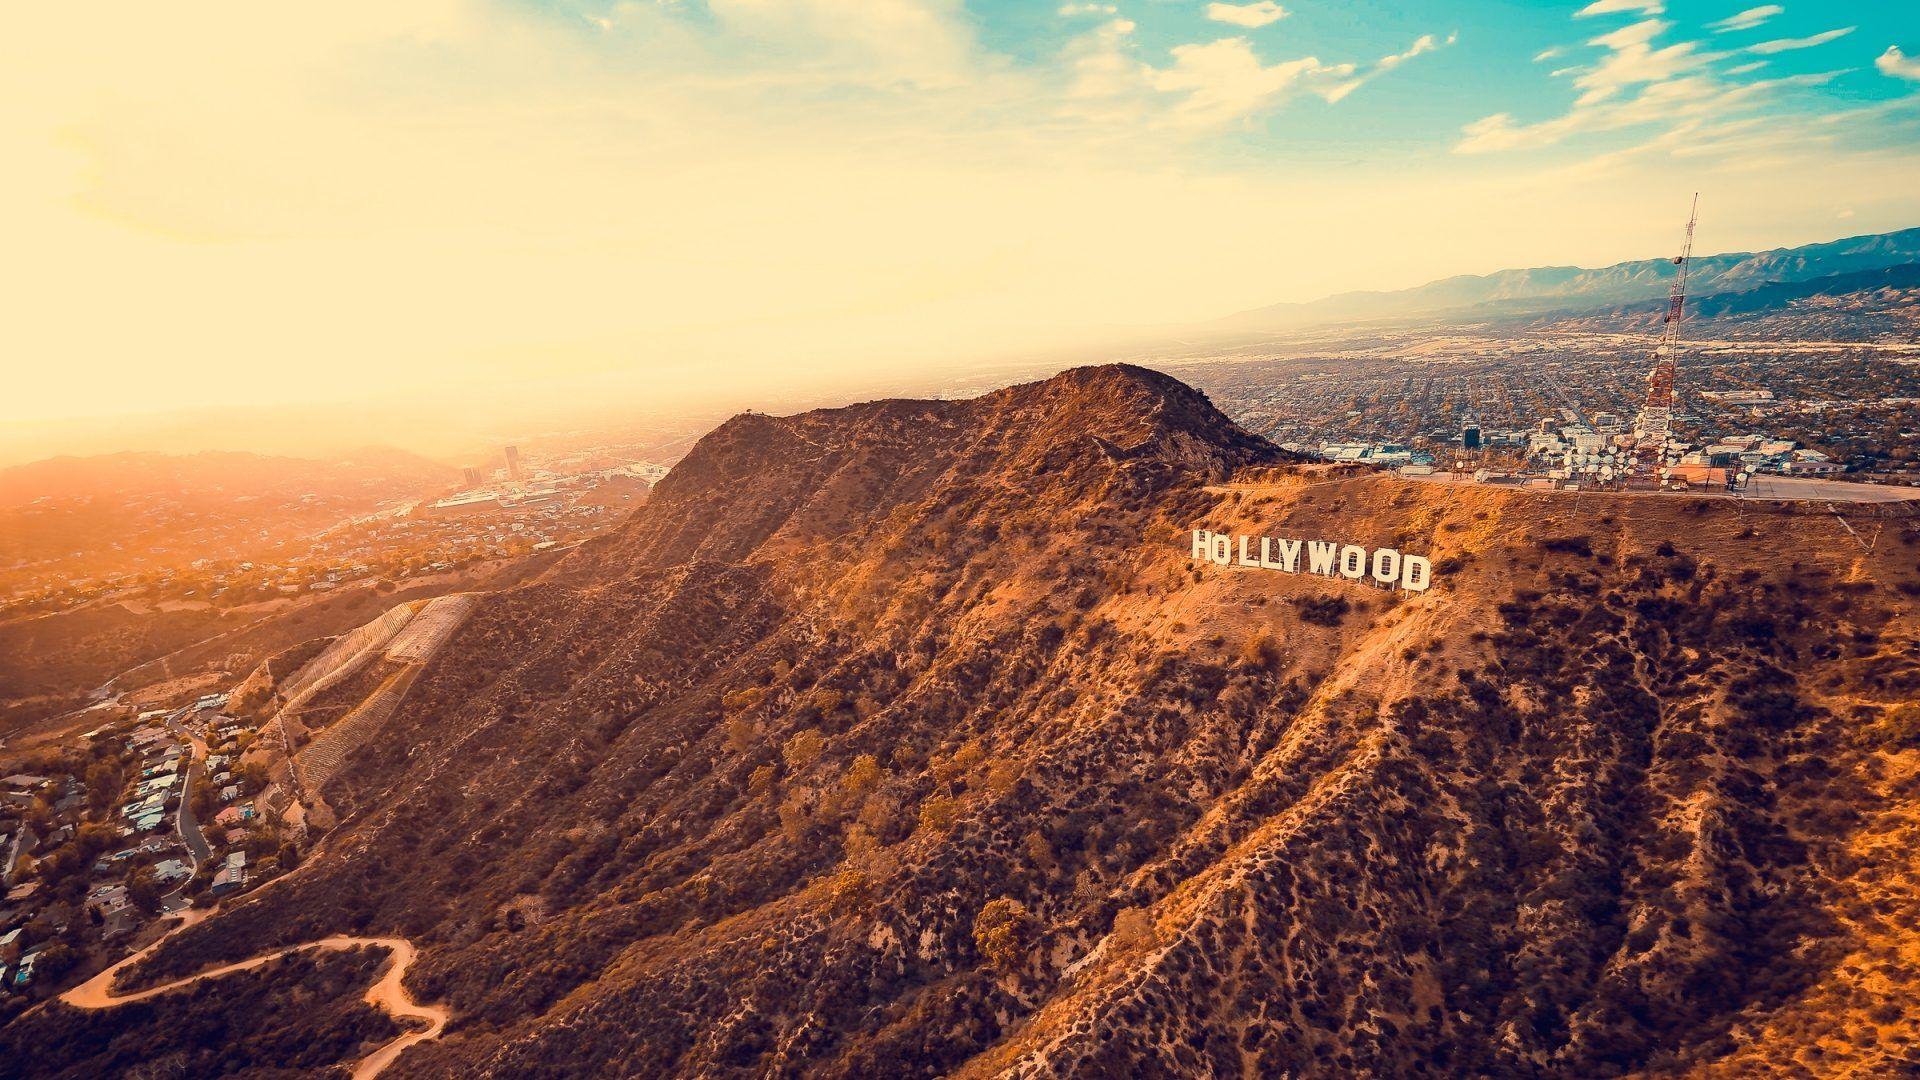 Nature HD Image Wallpaper hollywood mountains los angeles 115140